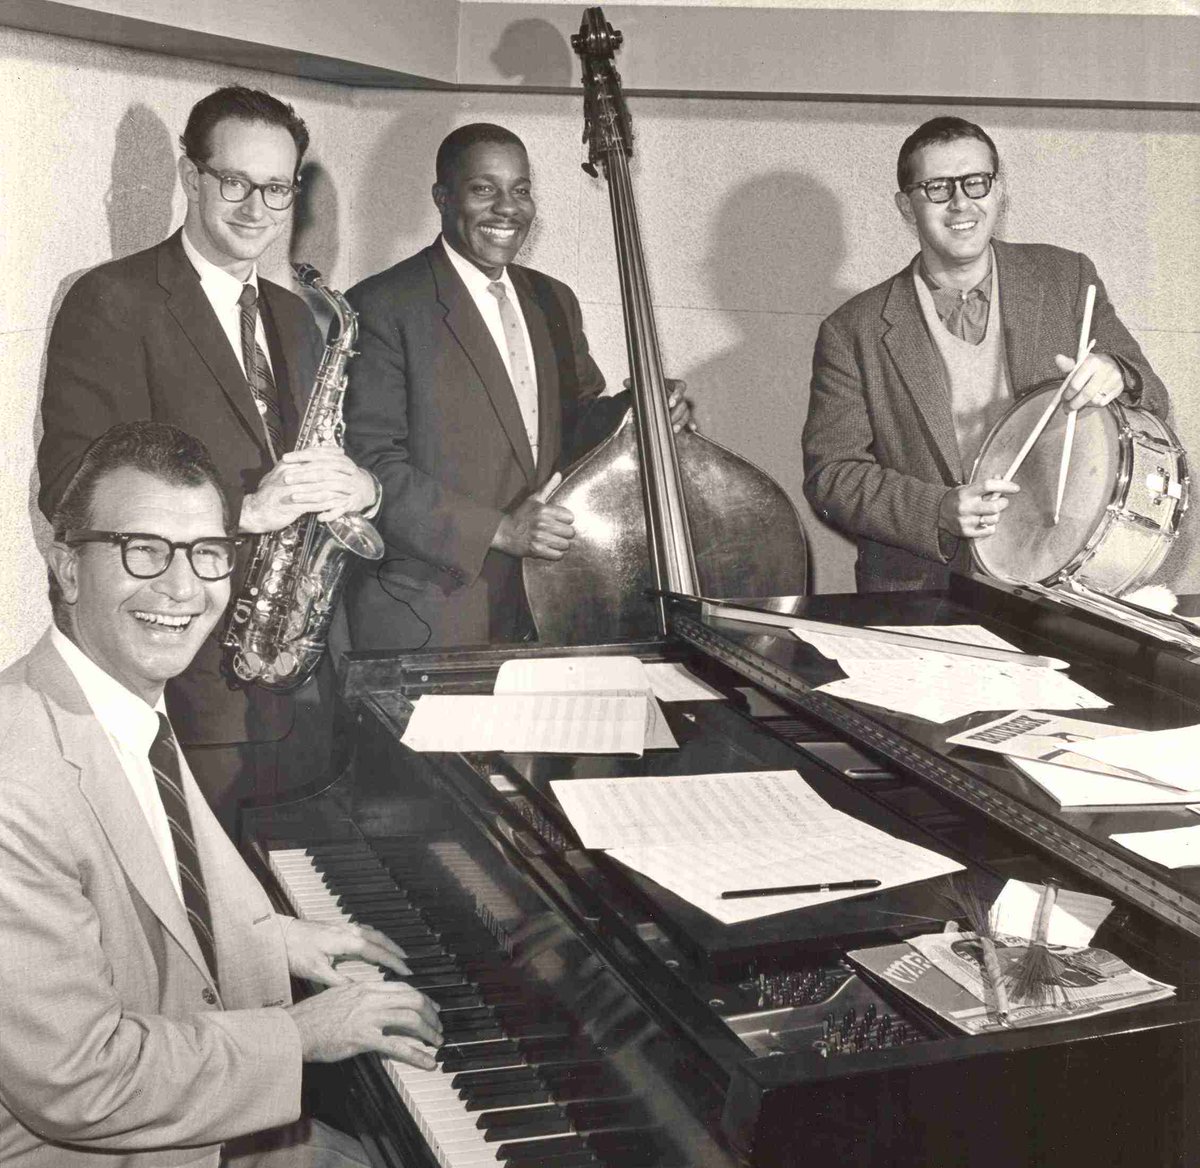 It's 5/4 - Happy Dave Brubeck Day! For all of you jazz fans, why don’t you “Take Five.” @TheDaveBrubeck #BrubeckDay